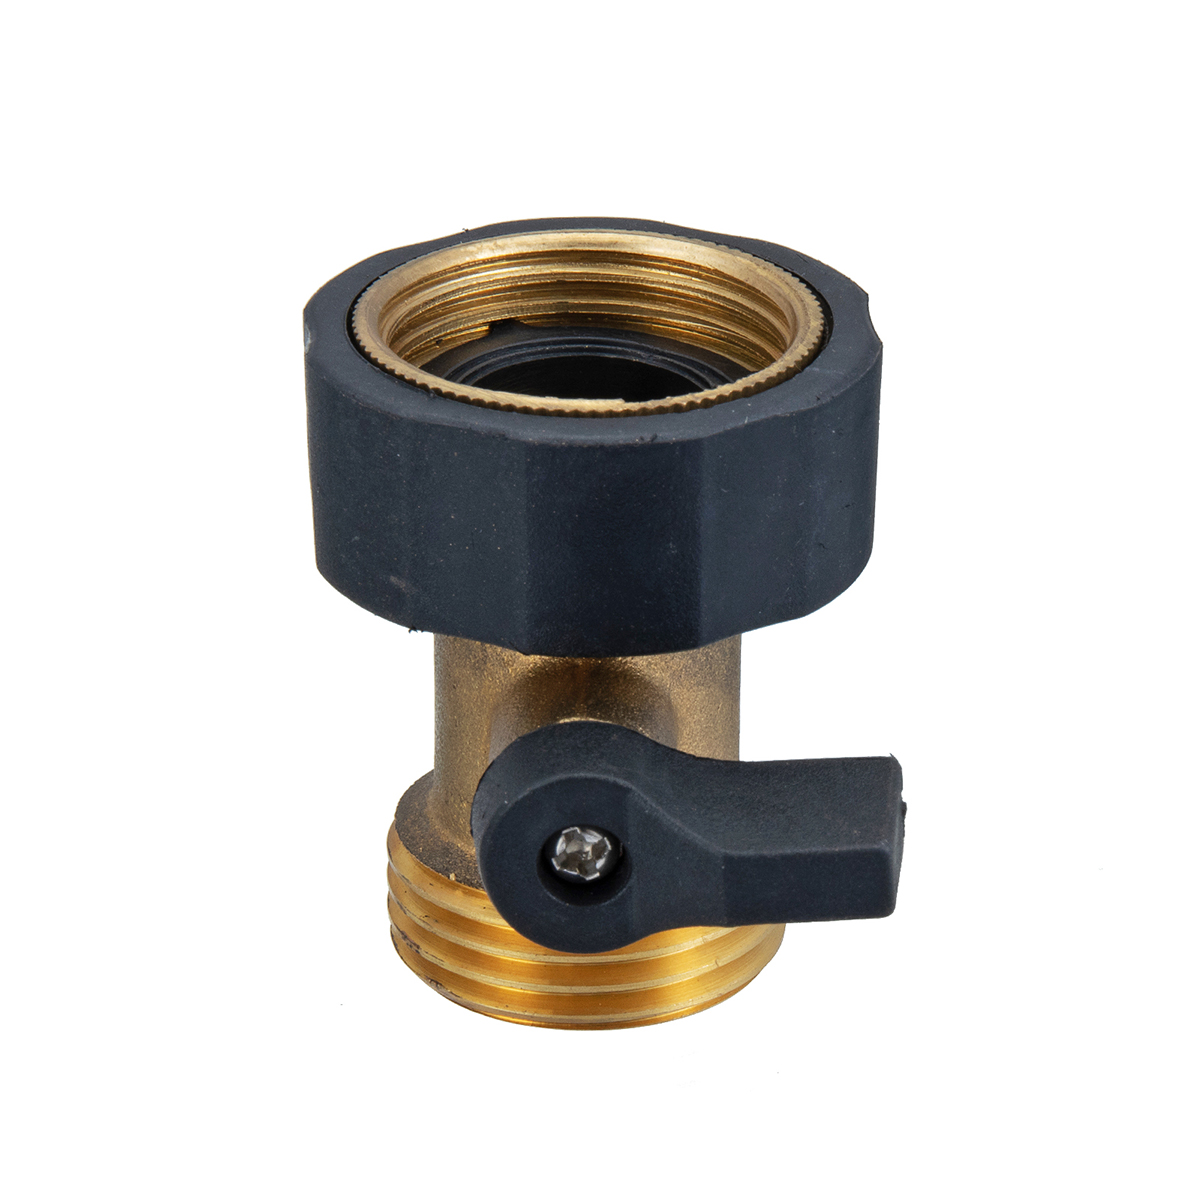 34-Garden-Hose-Quick-Connect-Water-Hose-Fit-Brass-Female-Male-Connector-Set-1943824-3